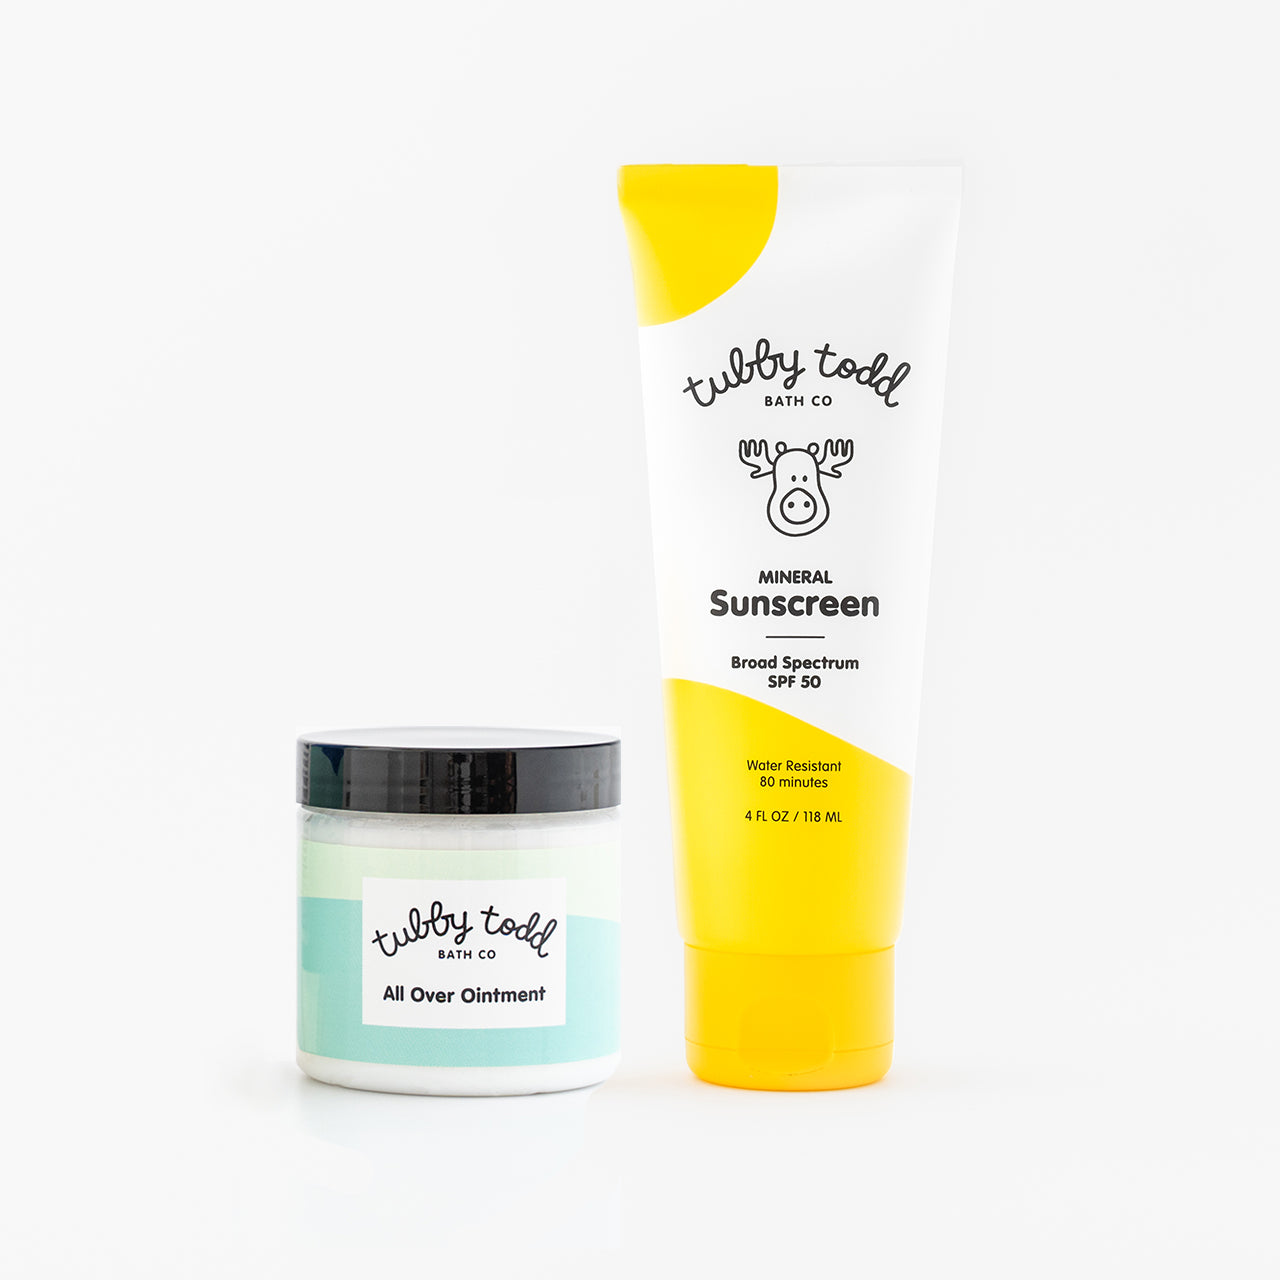 Mineral Sunscreen next to All Over Ointment on white background